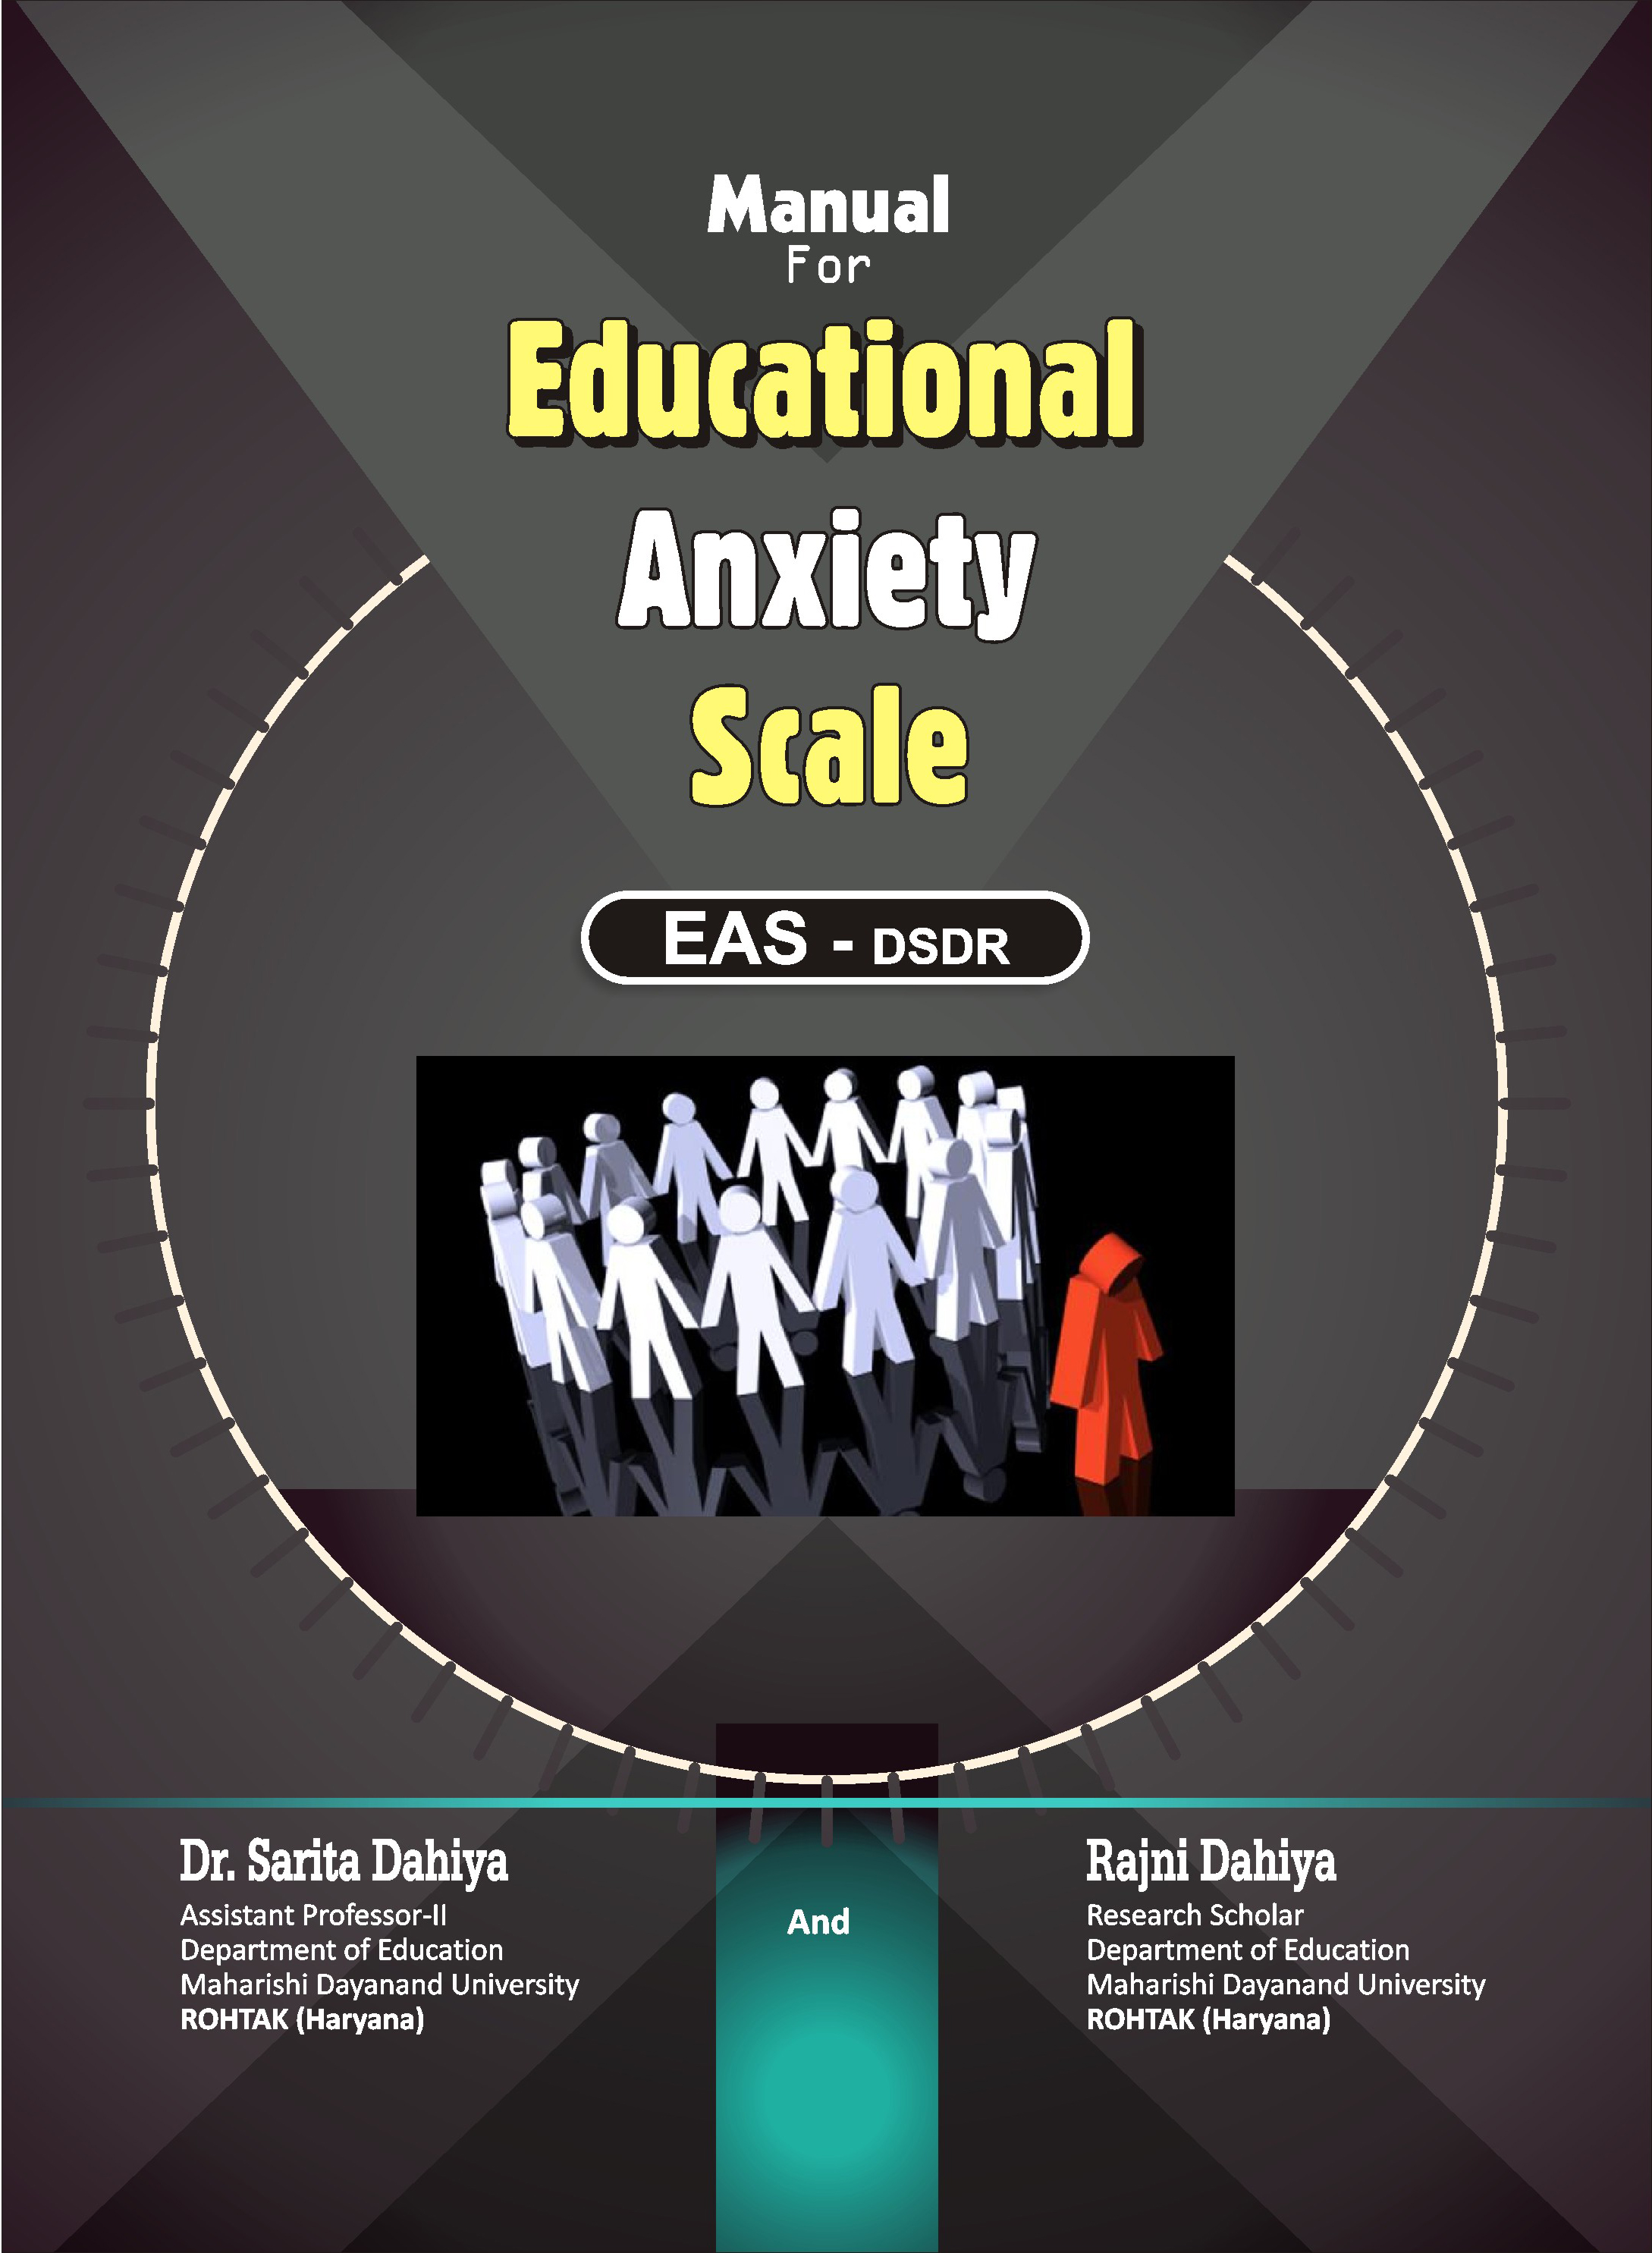 EDUCATIONAL-ANXIETY-SCALE